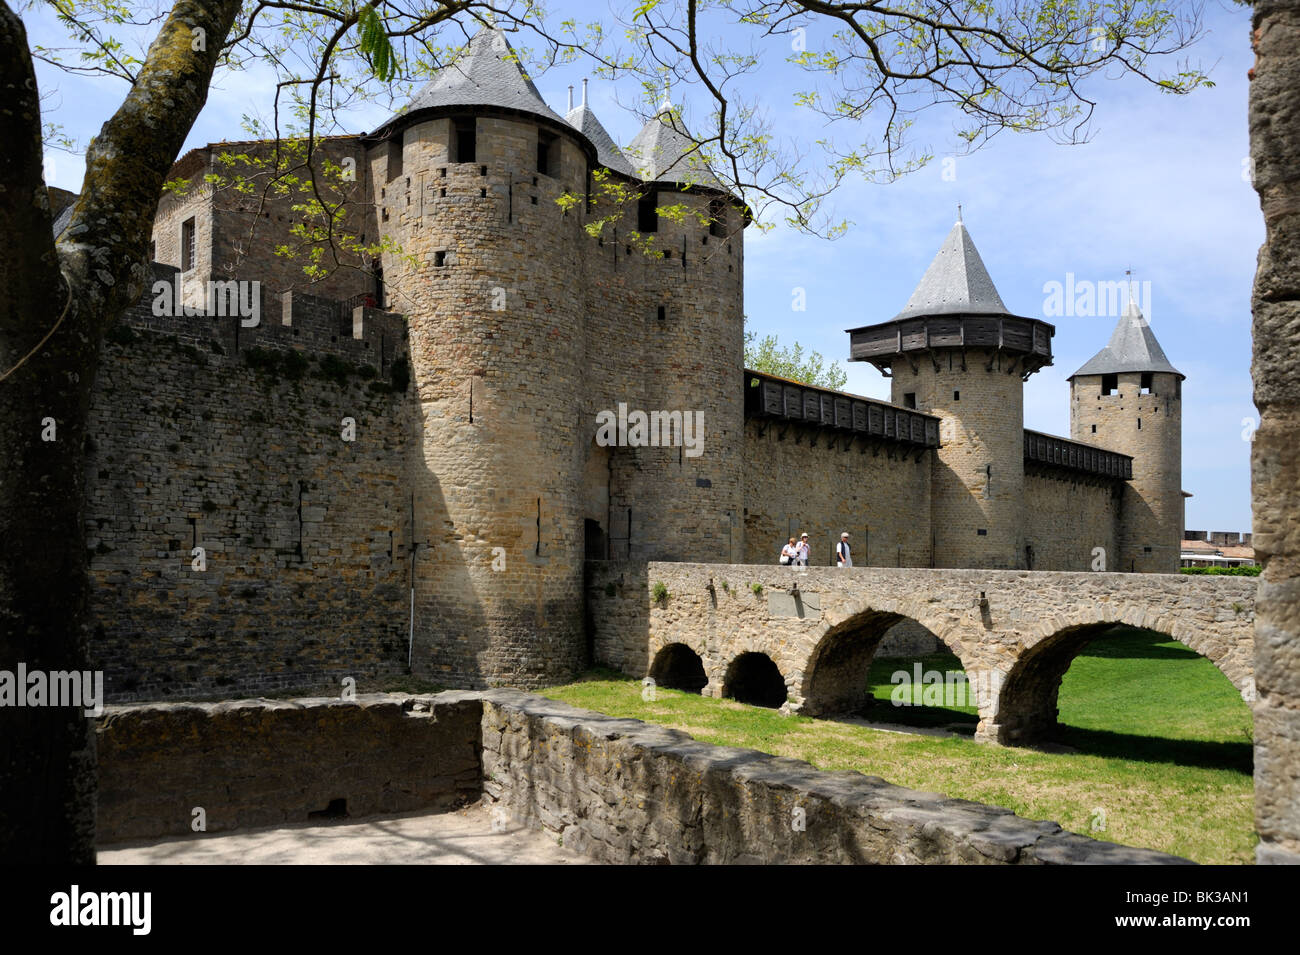 Entrance to Chateau Comtal in the walled and turreted fortress of La Cite, UNESCO World Heritage Site, Languedoc, France Stock Photo